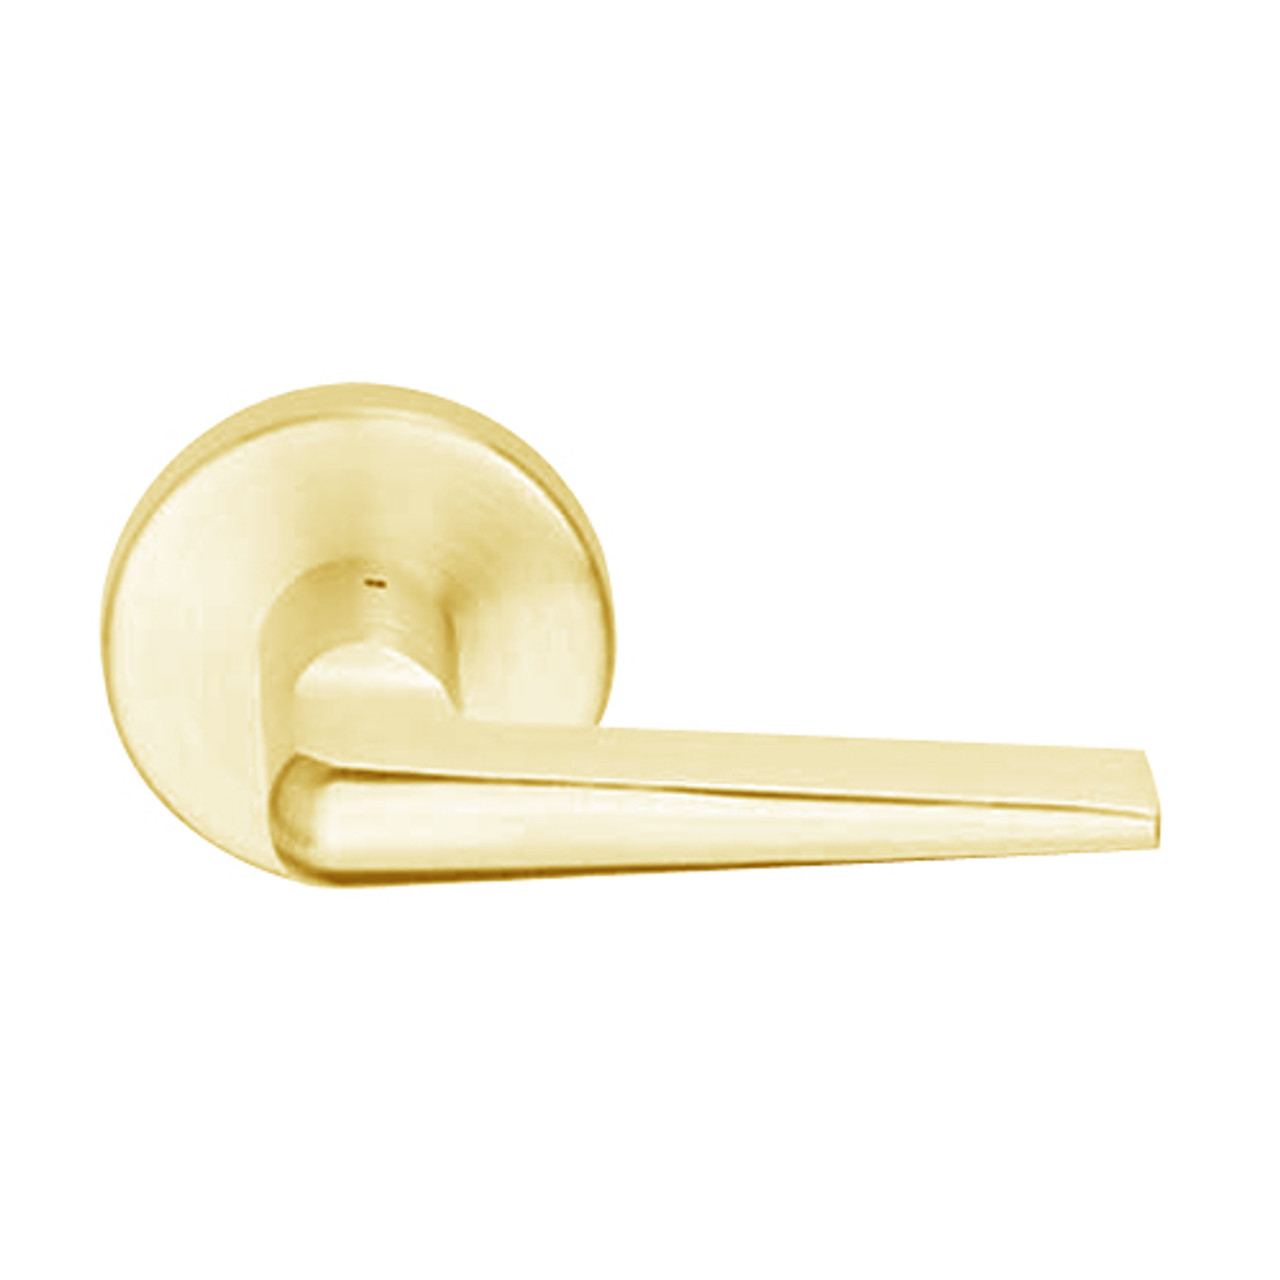 L9050R-05B-605 Schlage L Series Entrance Commercial Mortise Lock with 05 Cast Lever Design and Full Size Core in Bright Brass